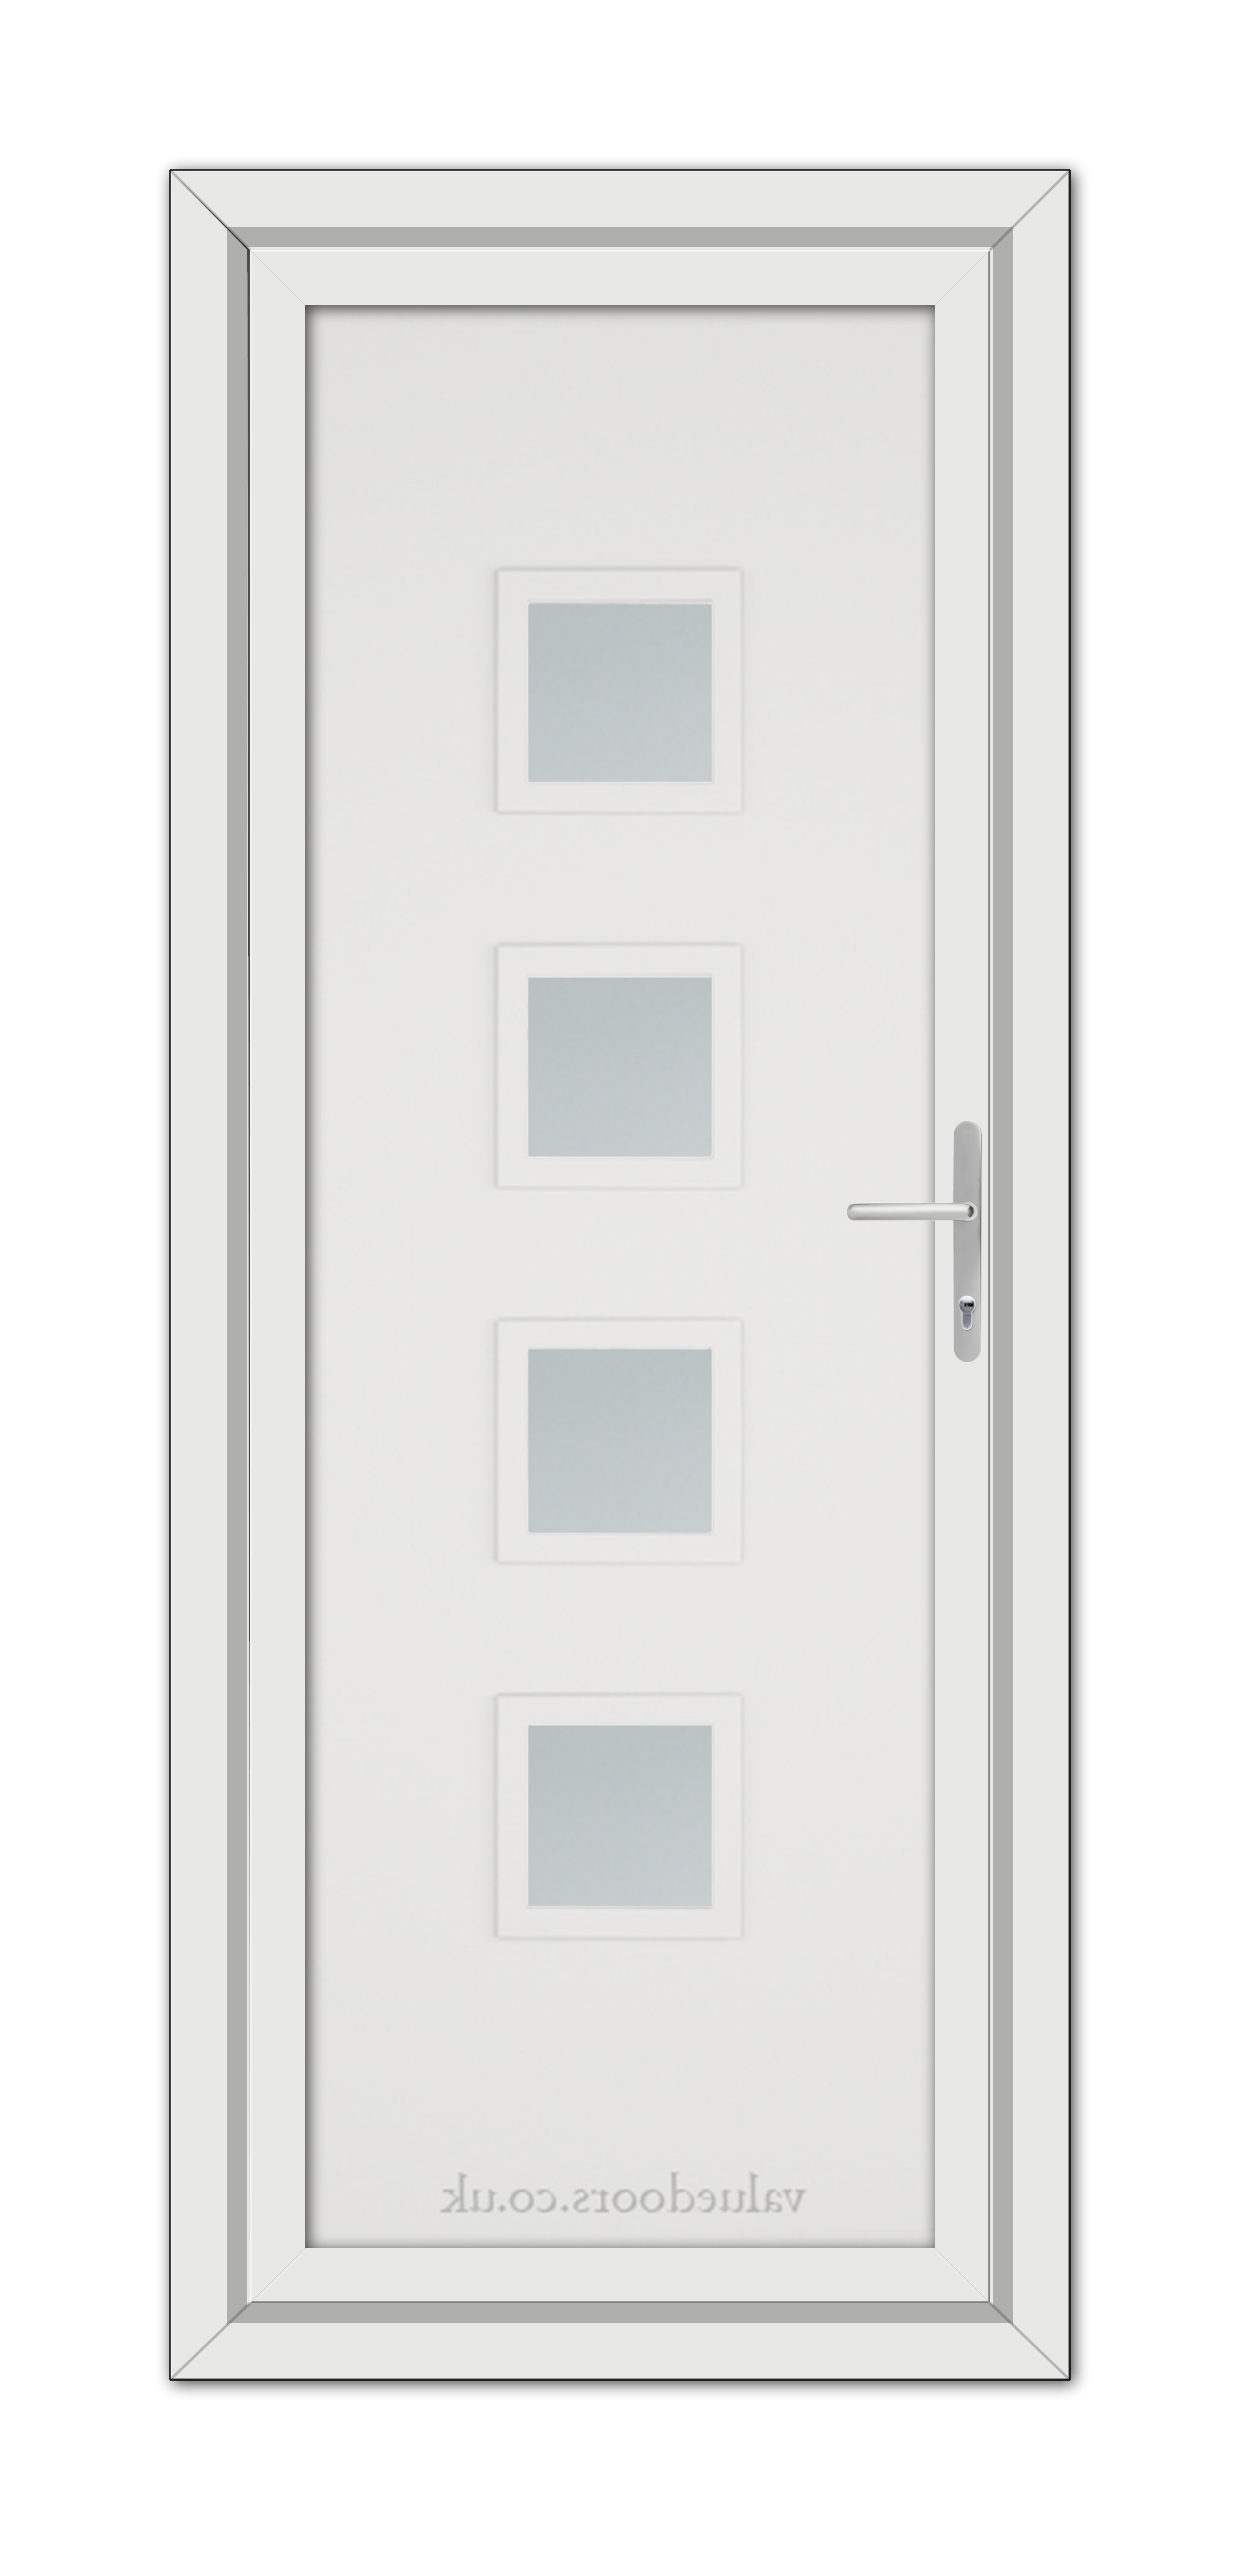 A White Modern 5034 uPVC Door with four small square frosted glass windows and a metallic handle, displayed vertically.